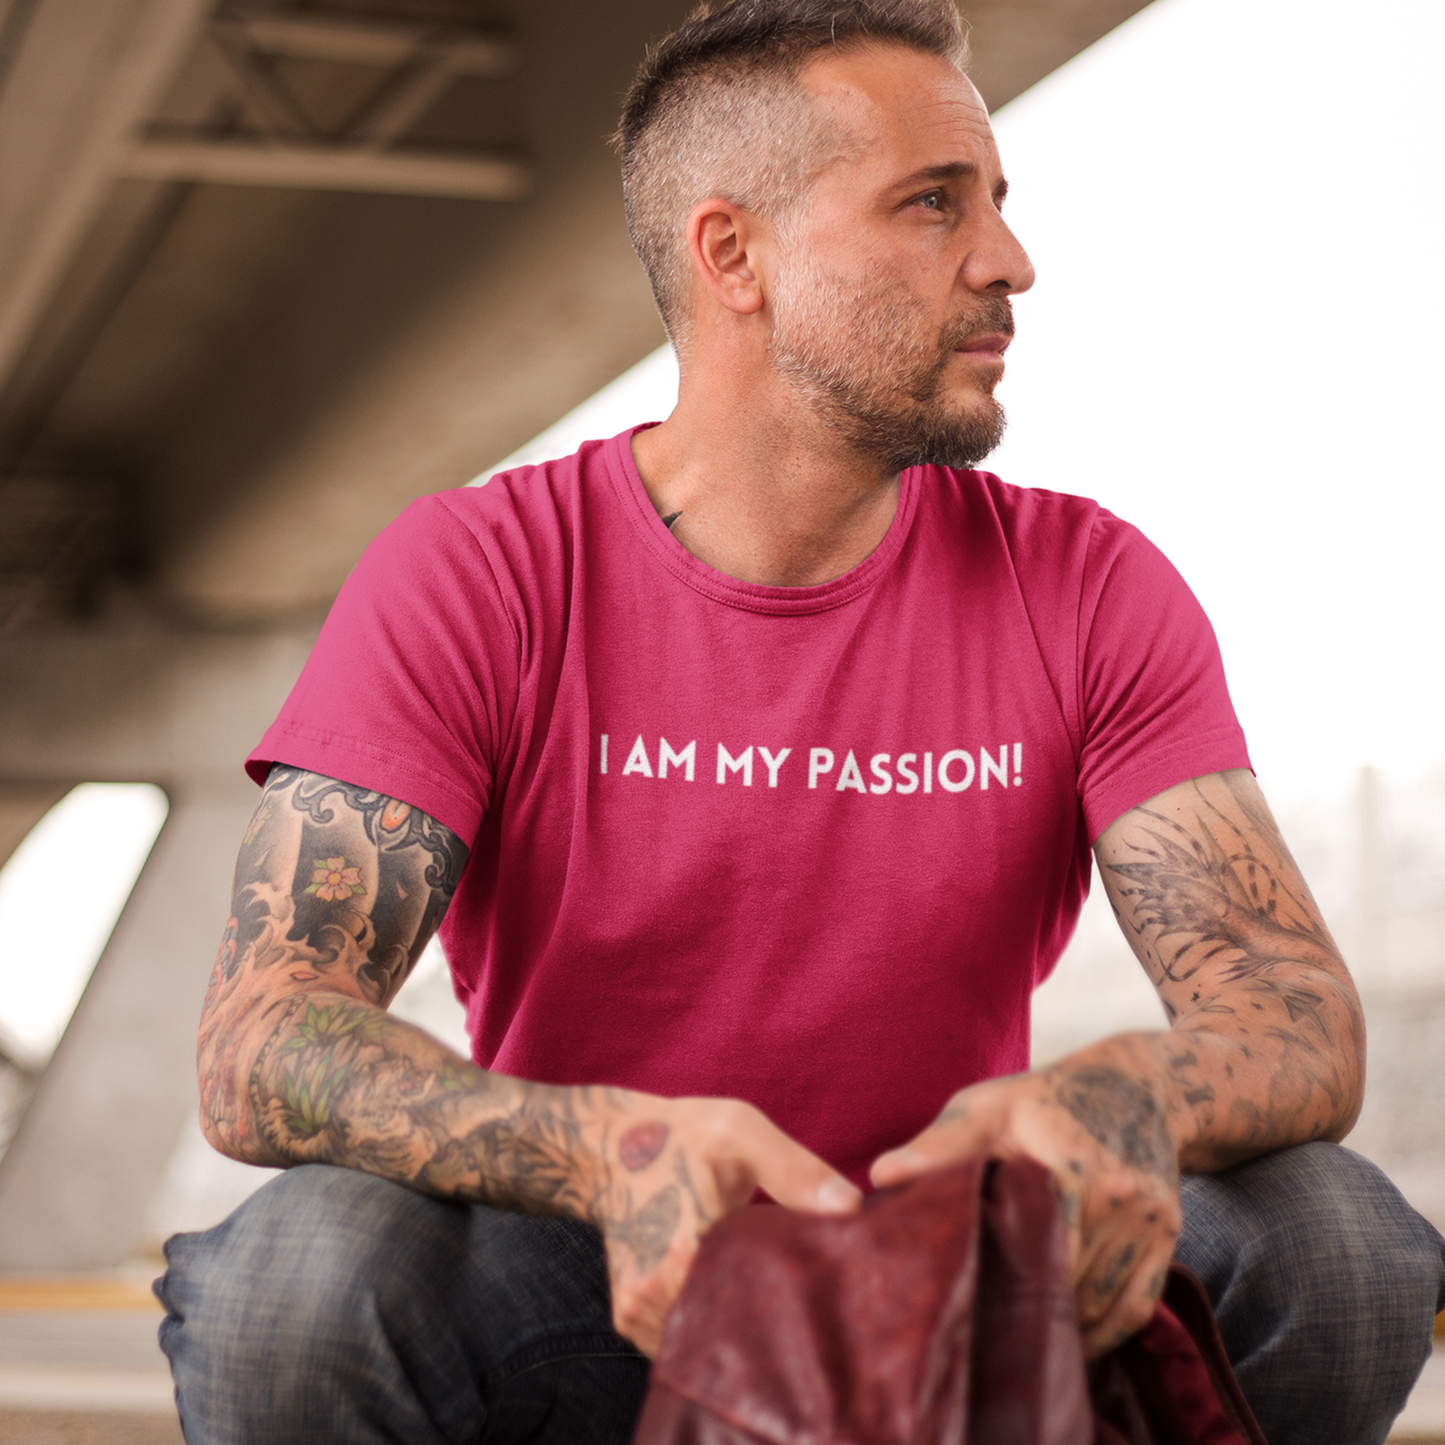 I am my passion unisex t shirt inspirational words t shirts t shirt gift for friends gift for family self affirming words on a shirt